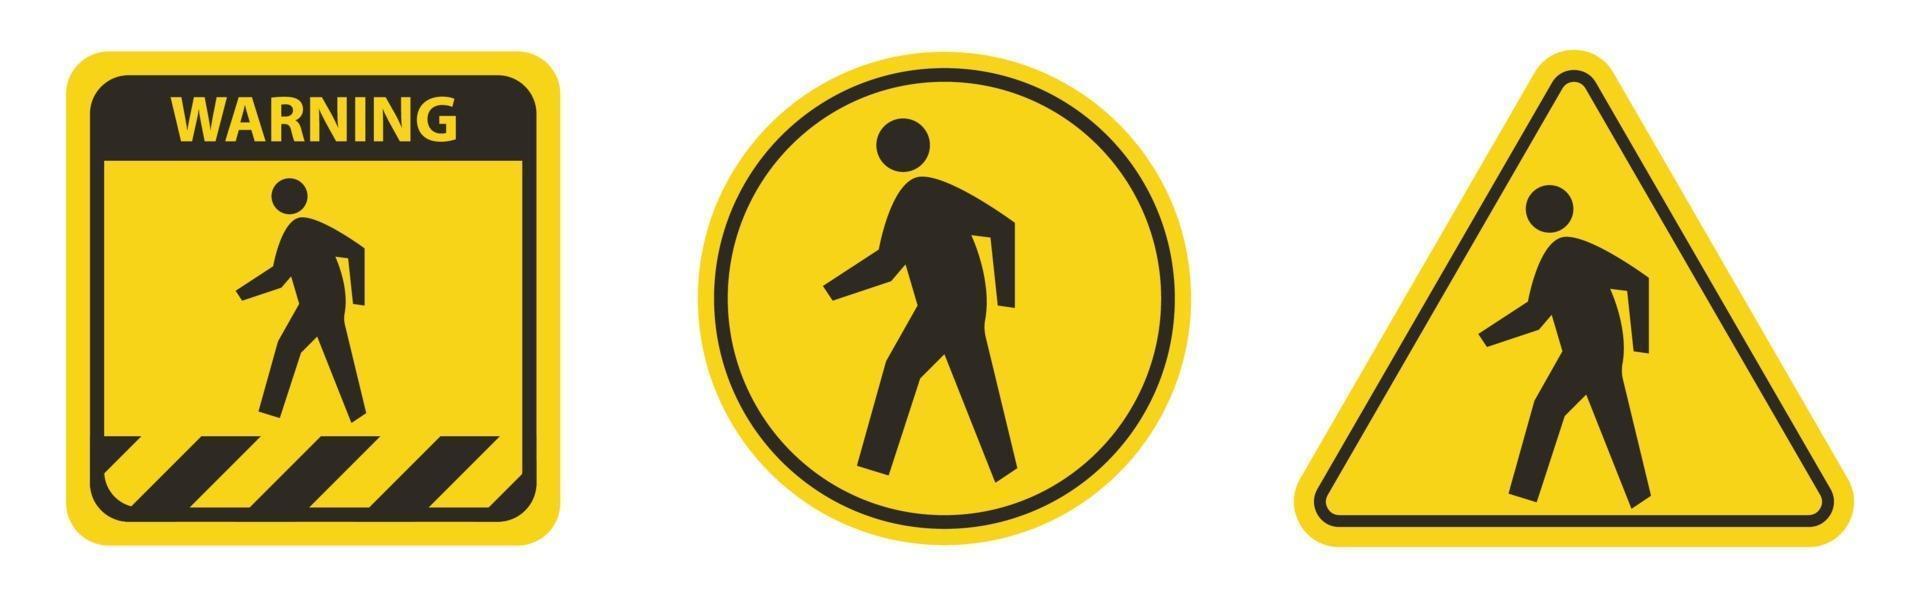 Pedestrian Crossing Symbol Sign Isolate on White Background vector